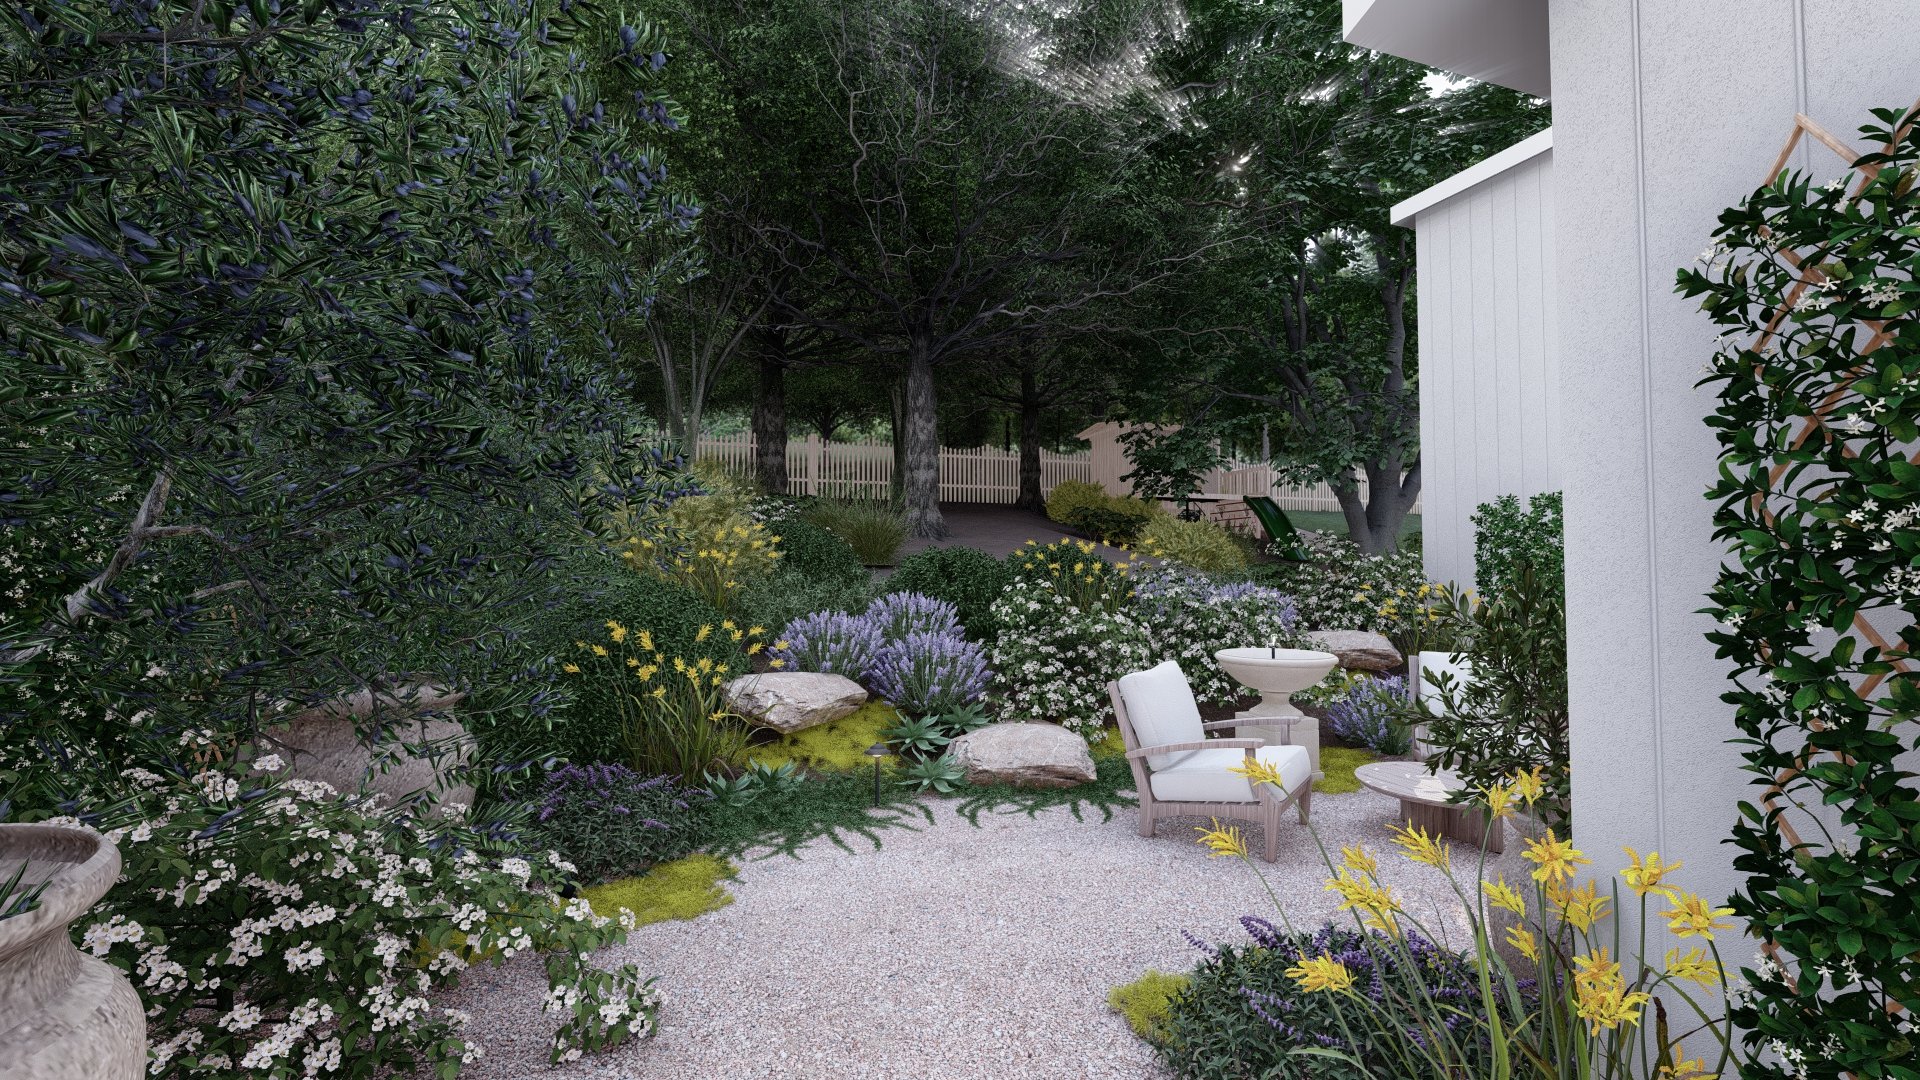 Gravel-floored cottage garden with outdoor furniture and ornamental plants